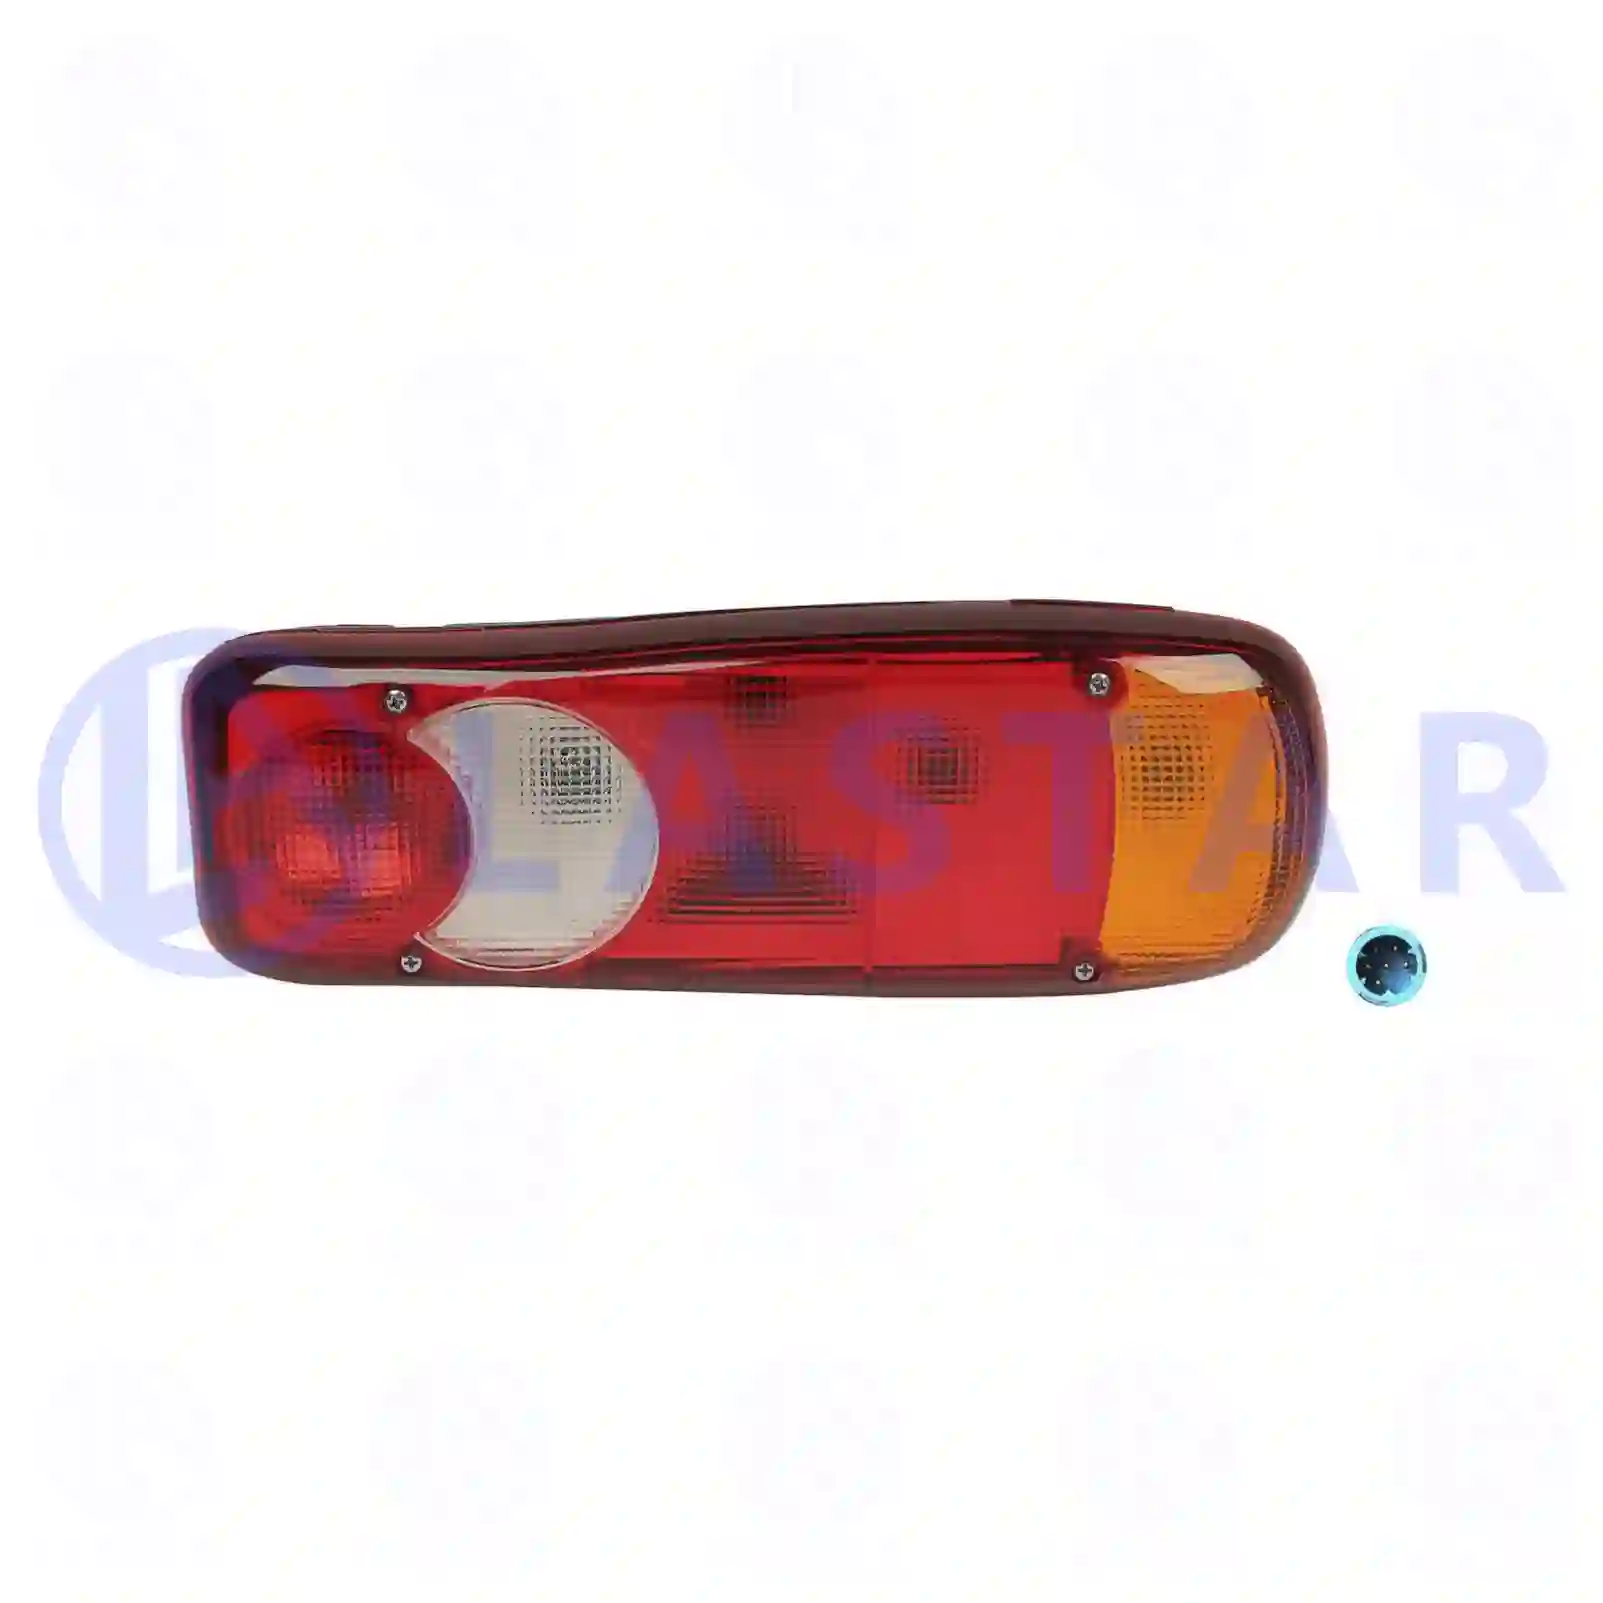 Tail lamp, right, 77711076, 5001846848, 7420862041, 20769784, ZG21040-0008, ||  77711076 Lastar Spare Part | Truck Spare Parts, Auotomotive Spare Parts Tail lamp, right, 77711076, 5001846848, 7420862041, 20769784, ZG21040-0008, ||  77711076 Lastar Spare Part | Truck Spare Parts, Auotomotive Spare Parts